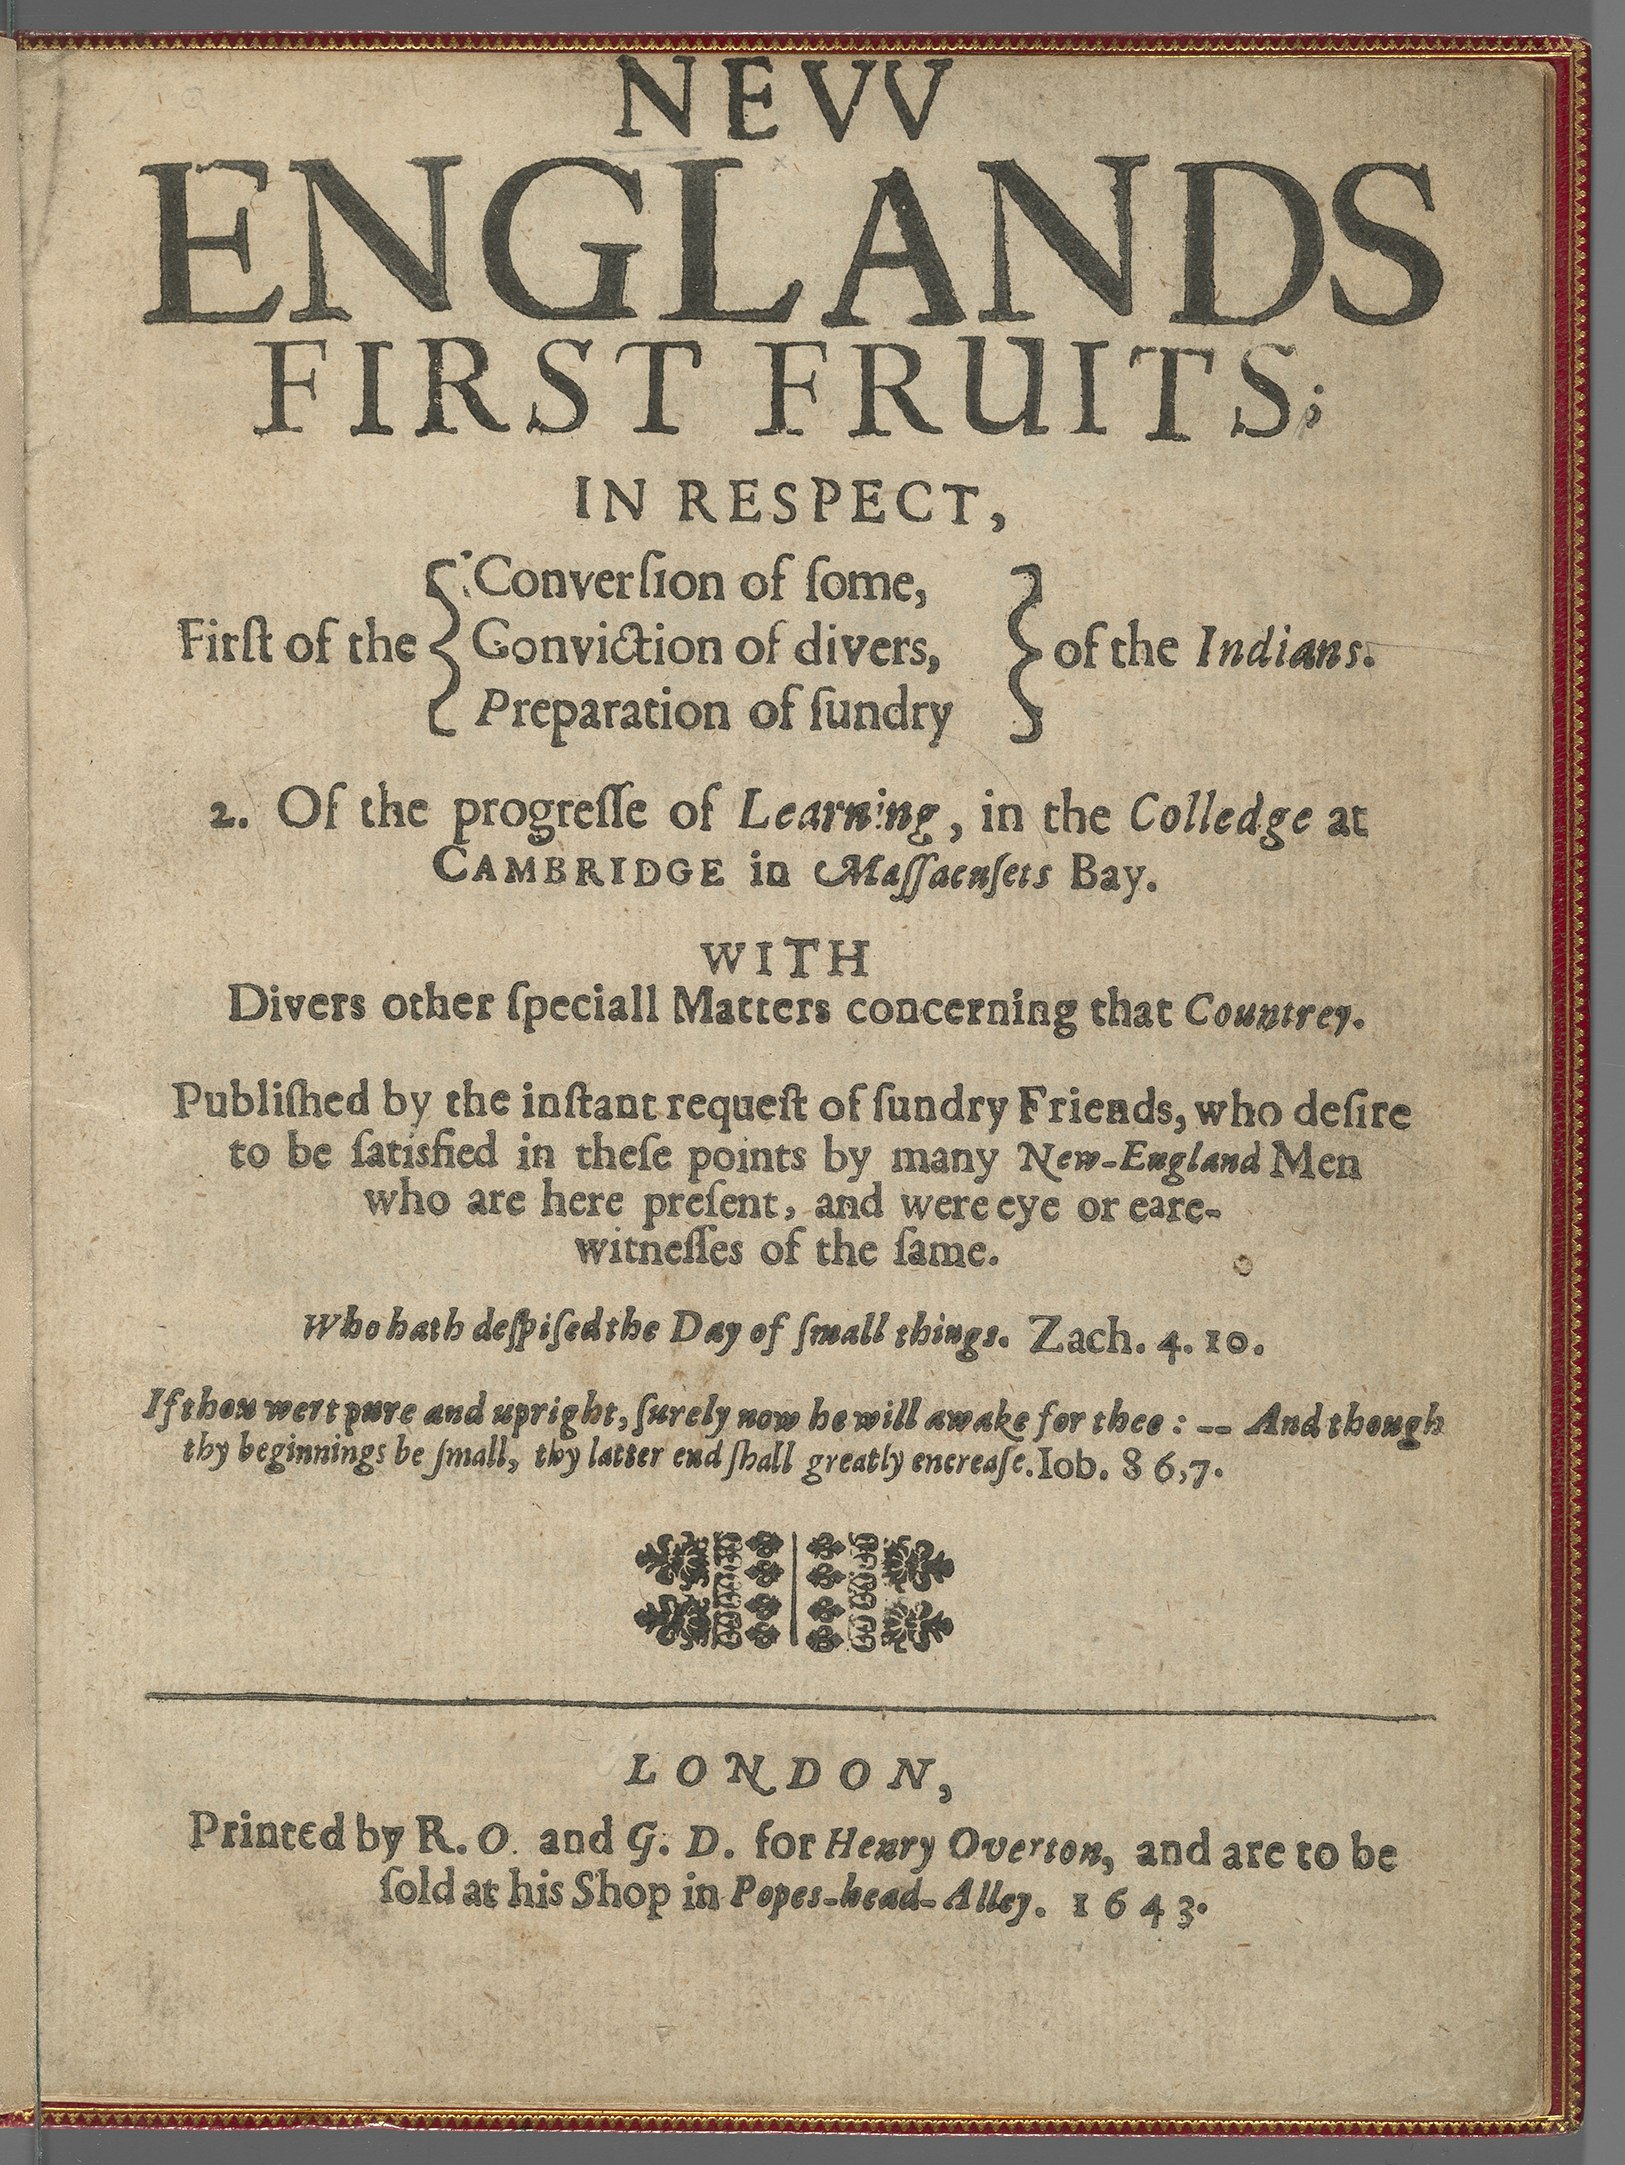 Title page of New England's First Fruits pamphlet